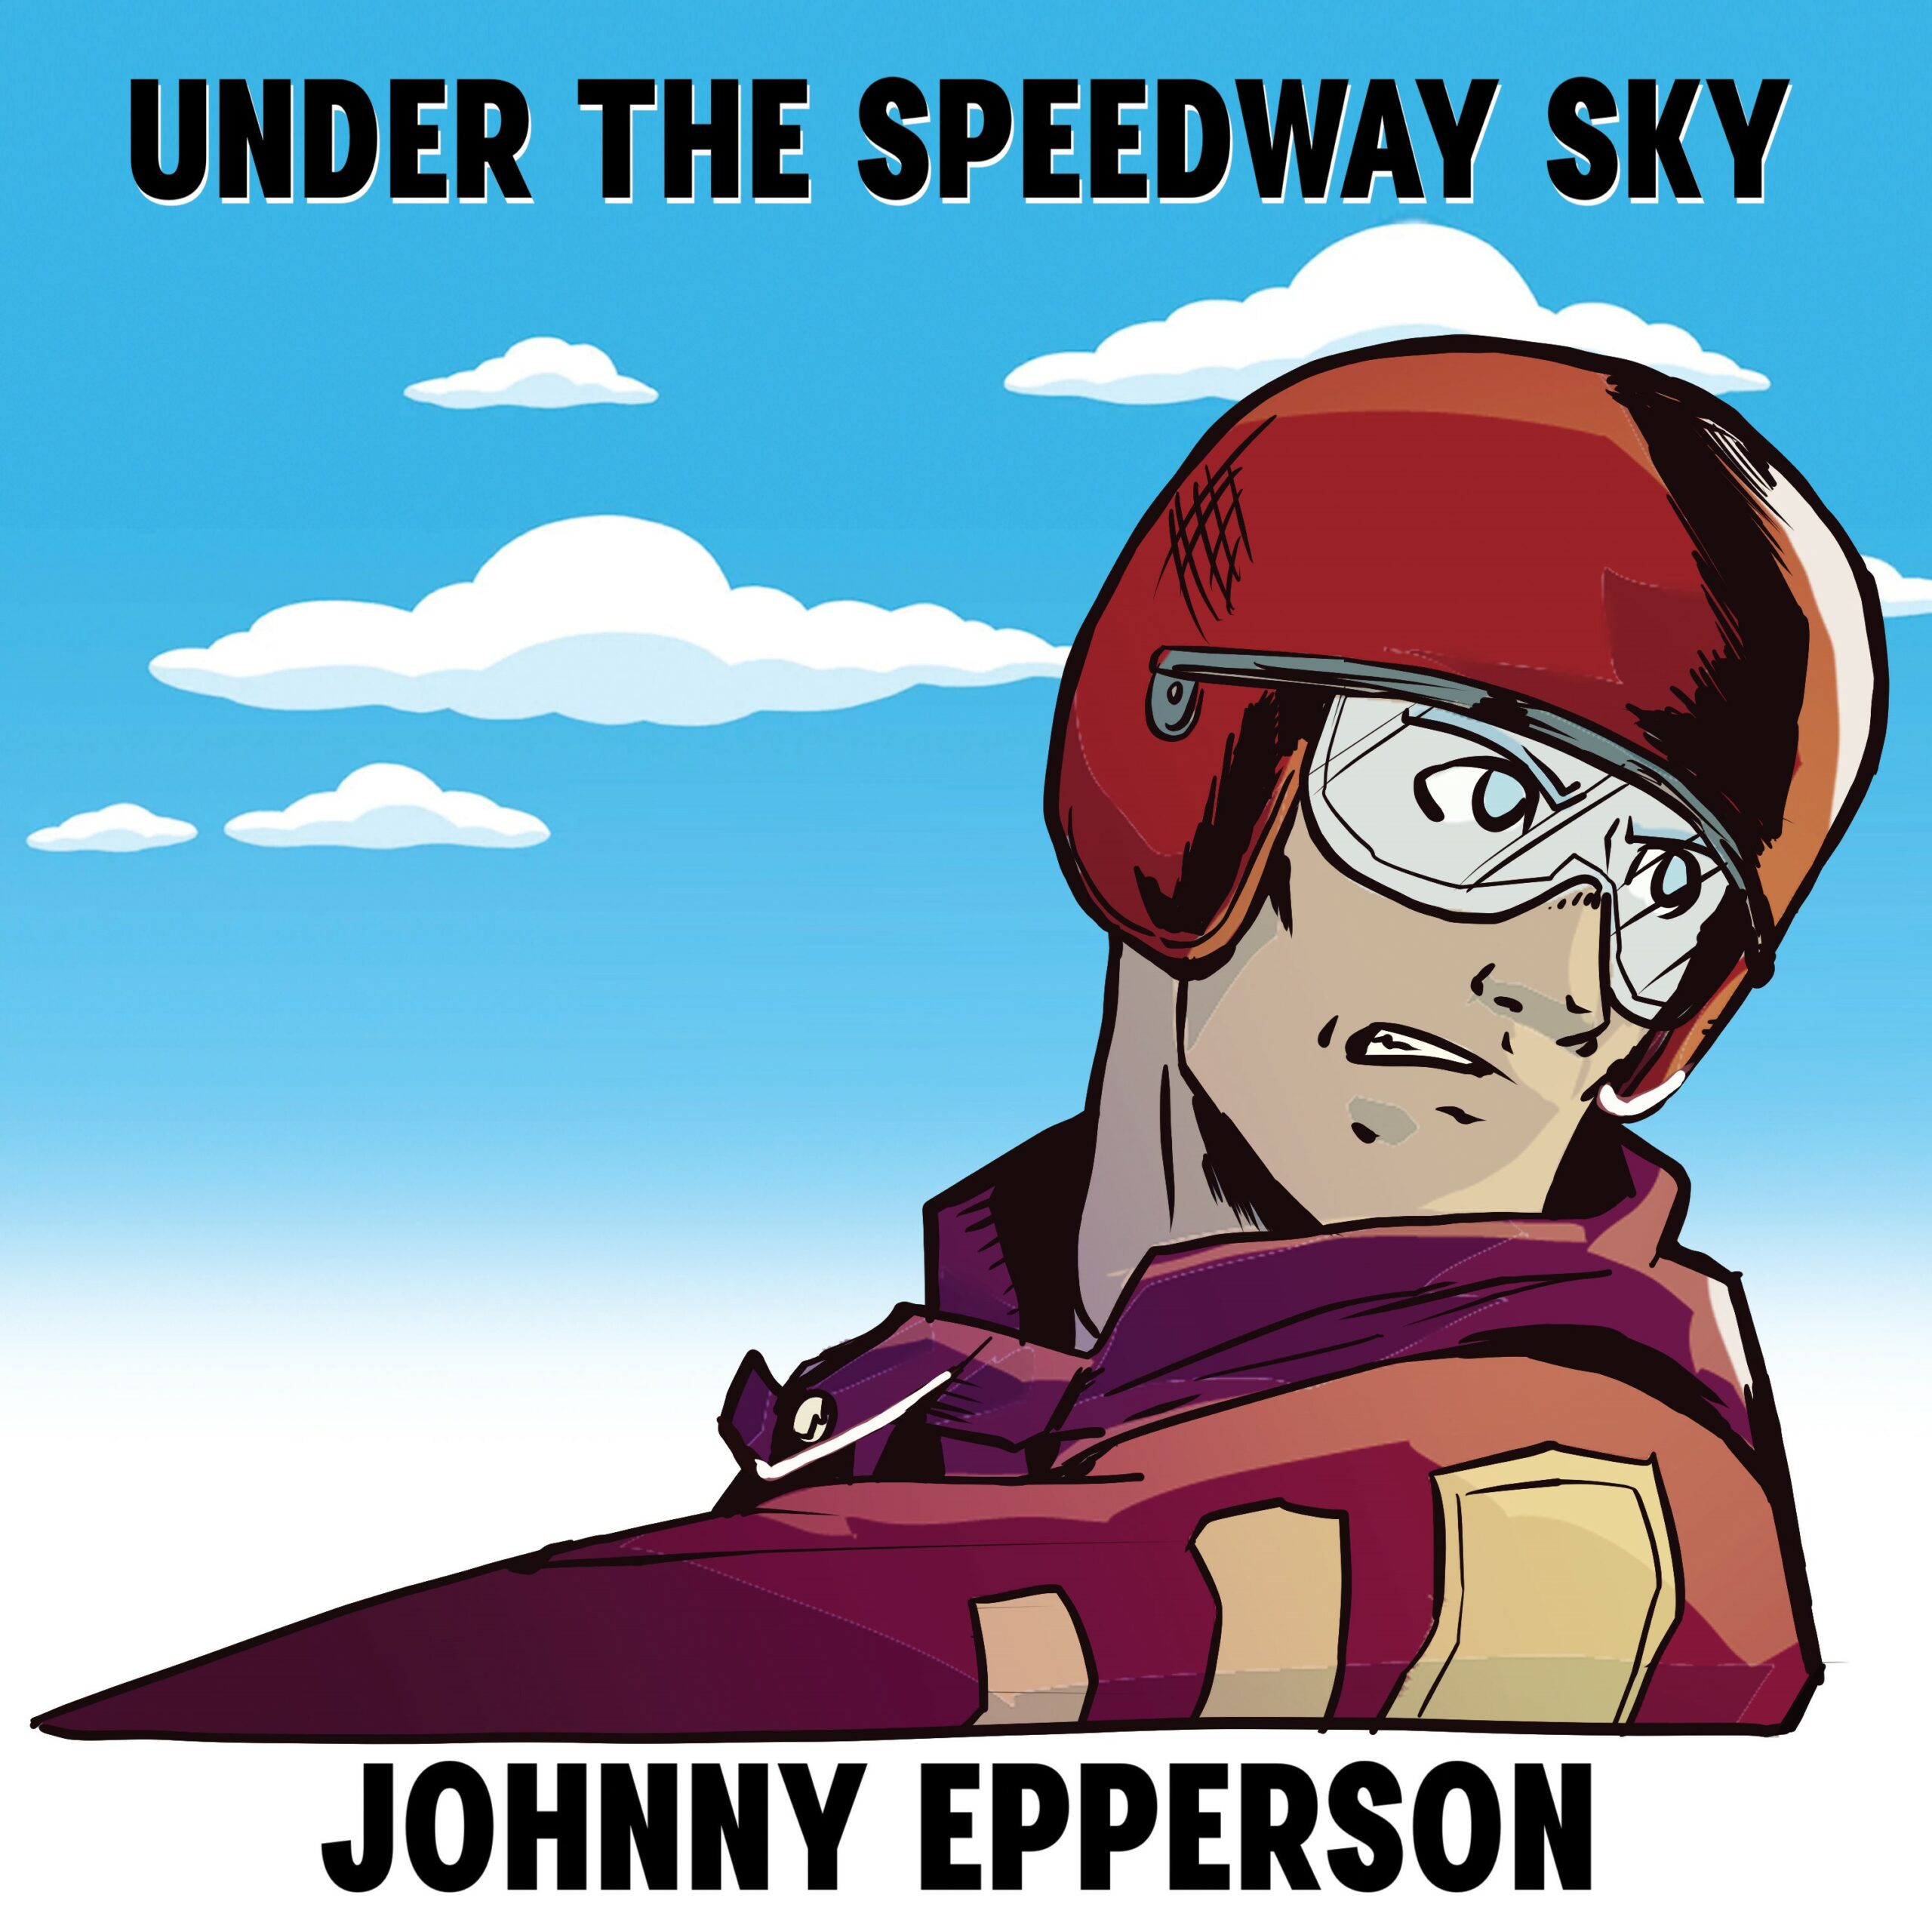 Artwork for the album ‘Under The Speedway Sky’ by Johnny Epperson, photo Tyler Andrews